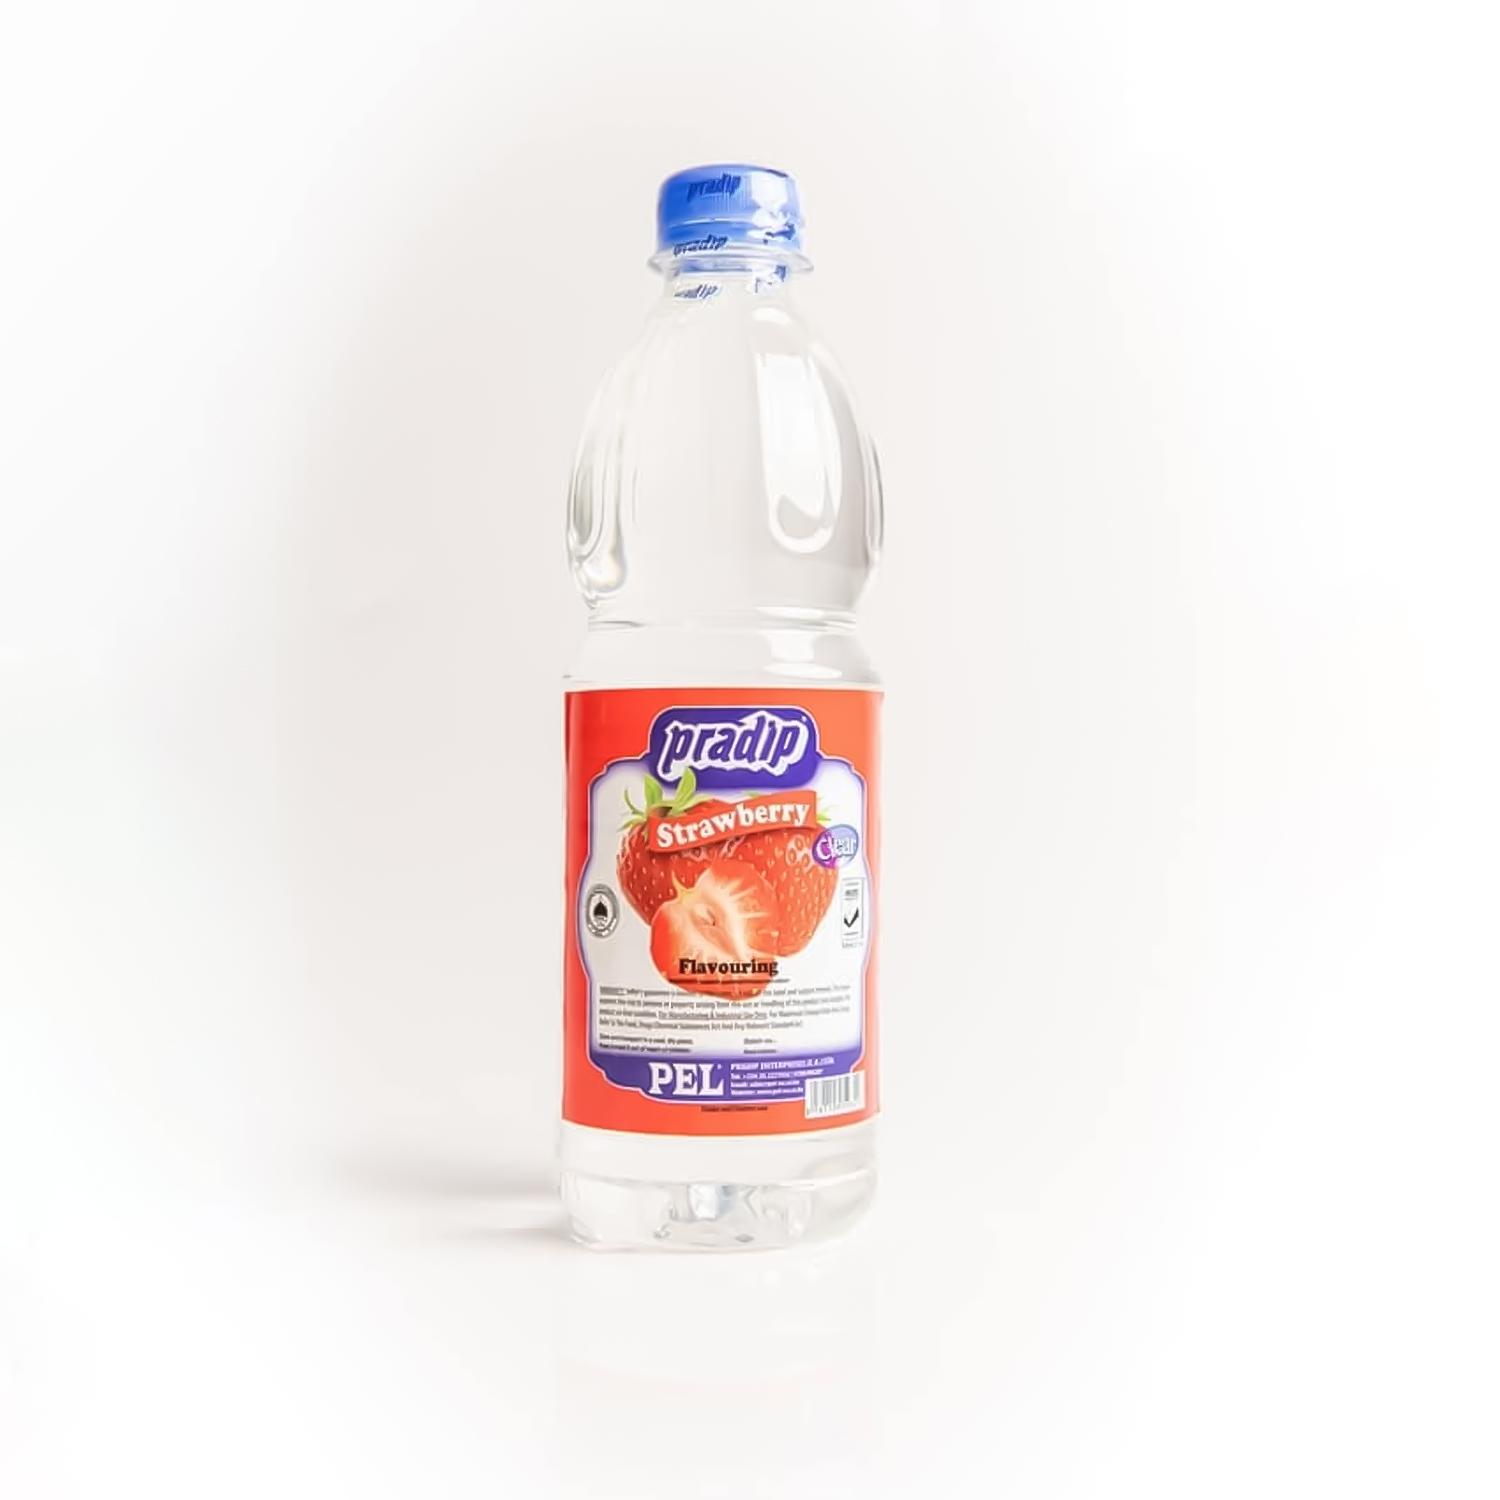 PRADIP STRAWBERRY CLEAR FLAVOUR 1LITRE